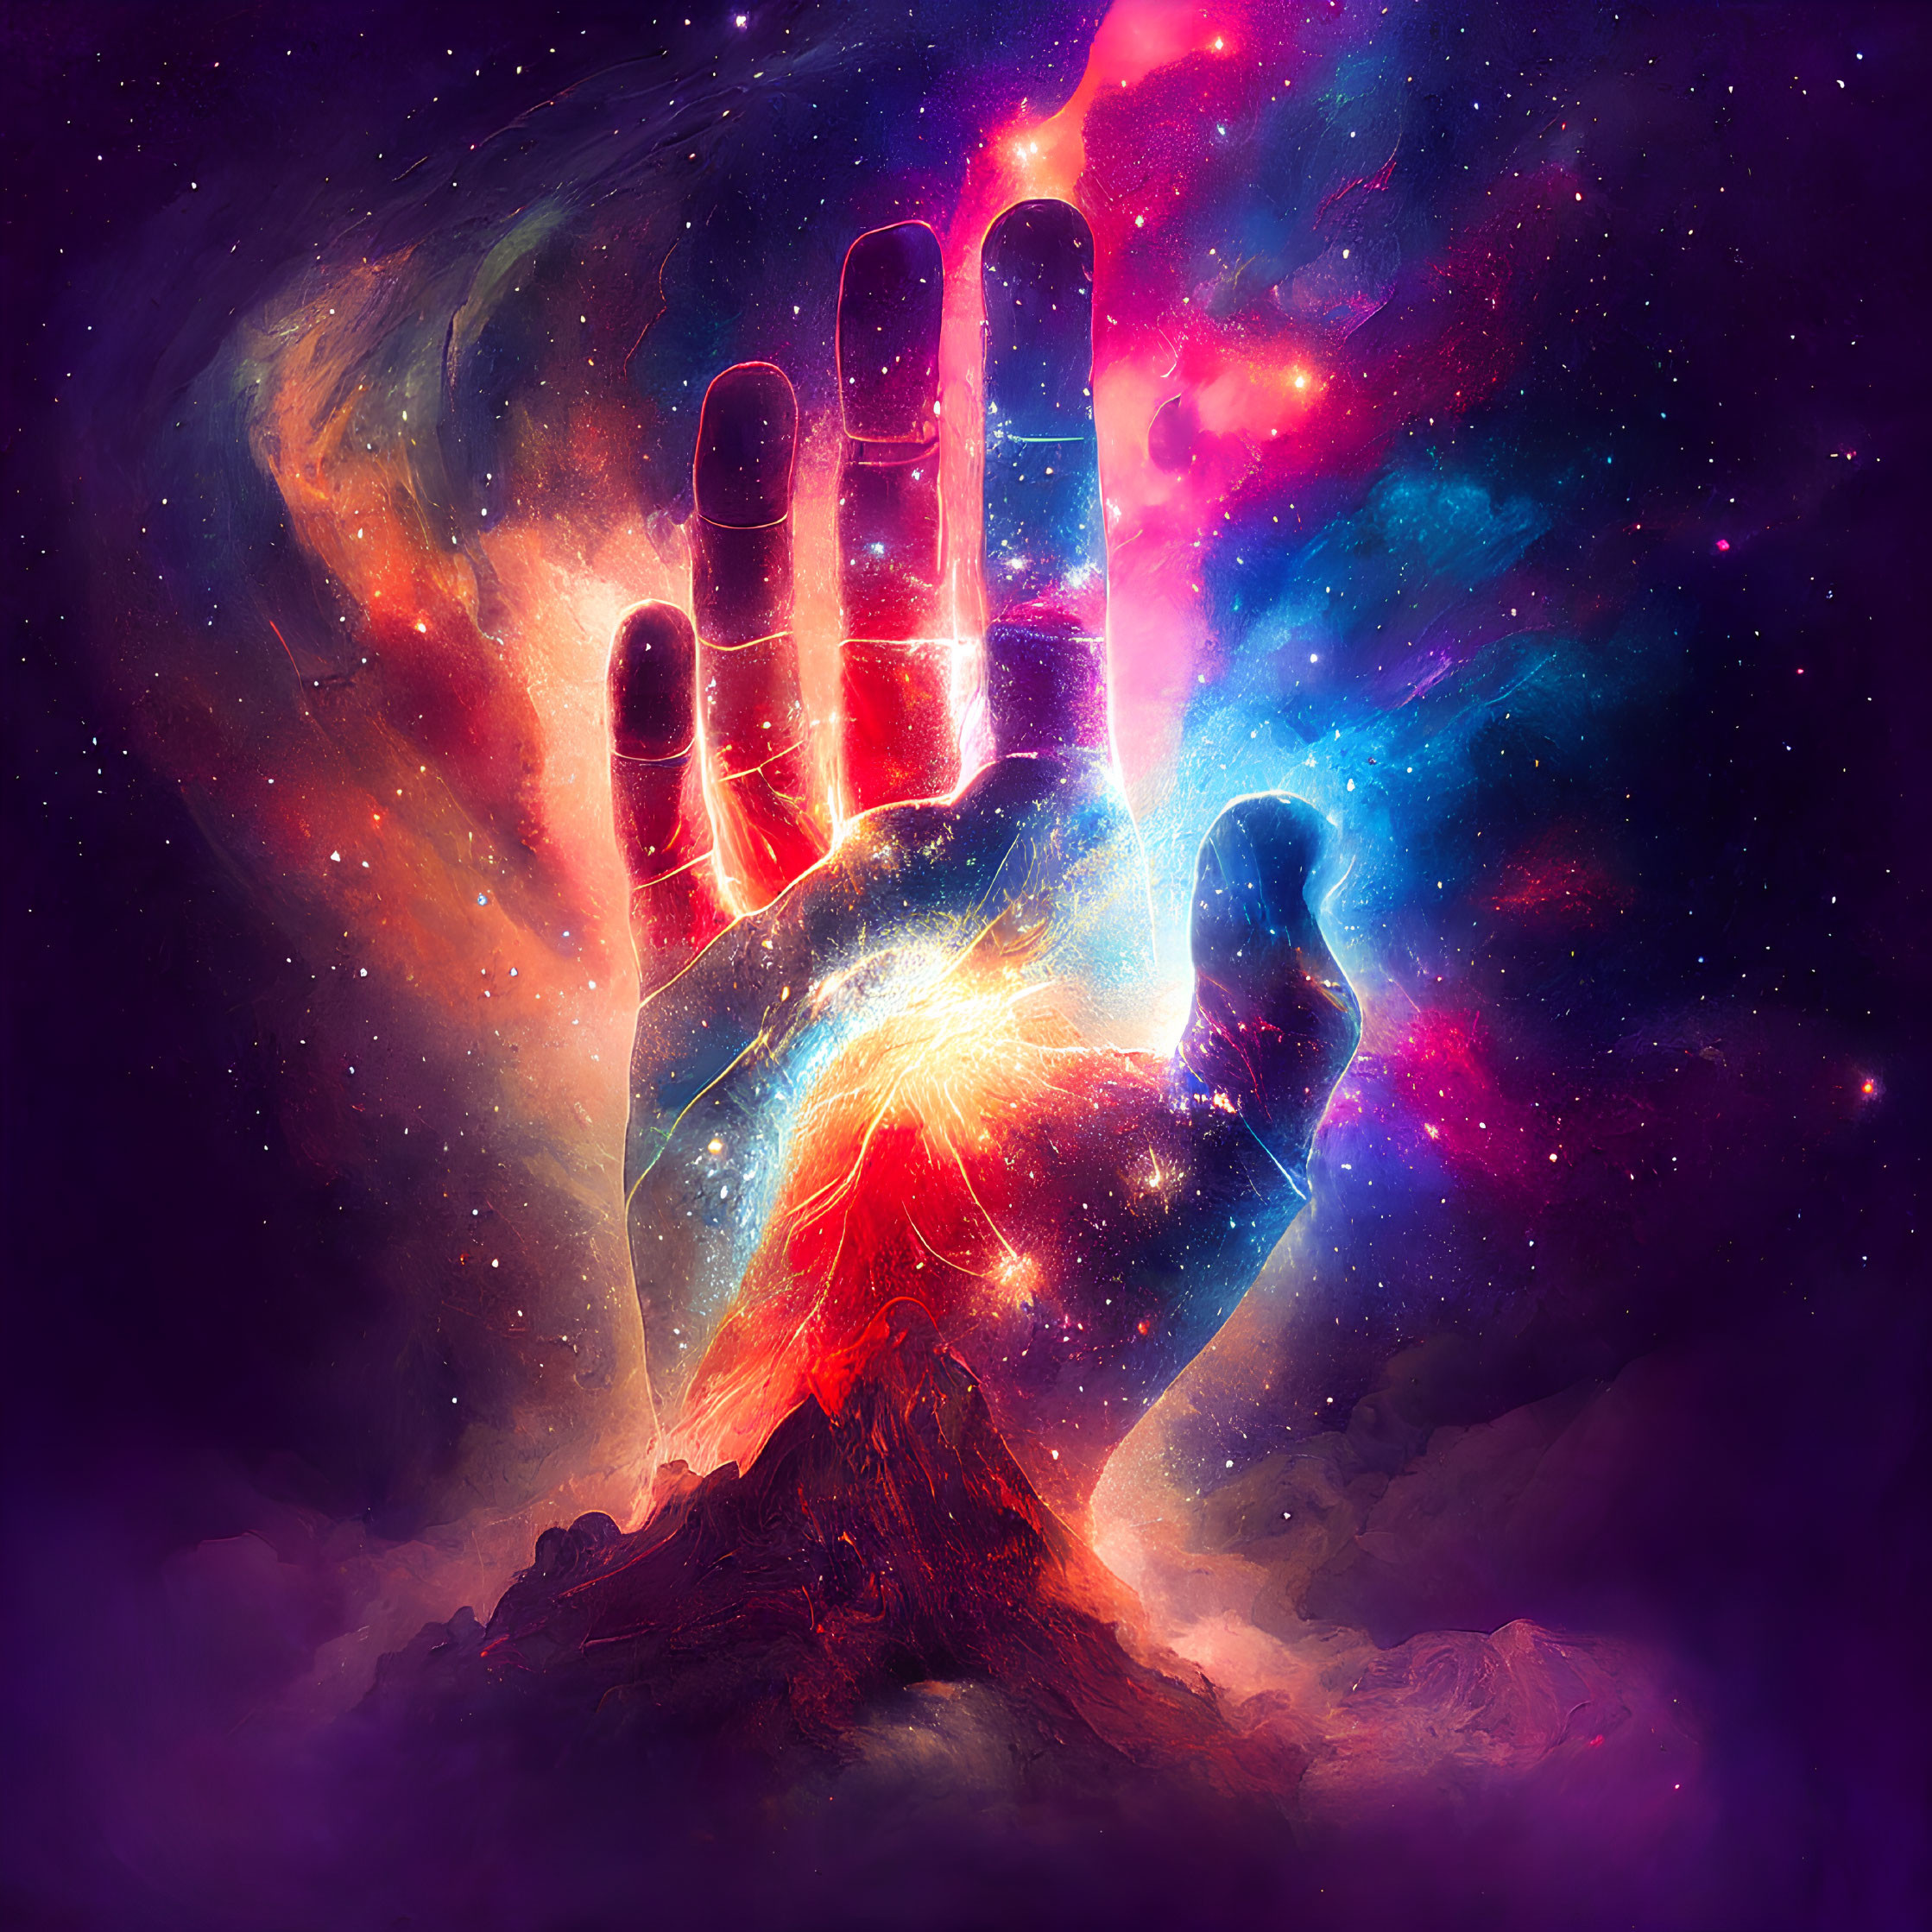 Vibrant cosmic digital artwork featuring a hand surrounded by nebulas and stars